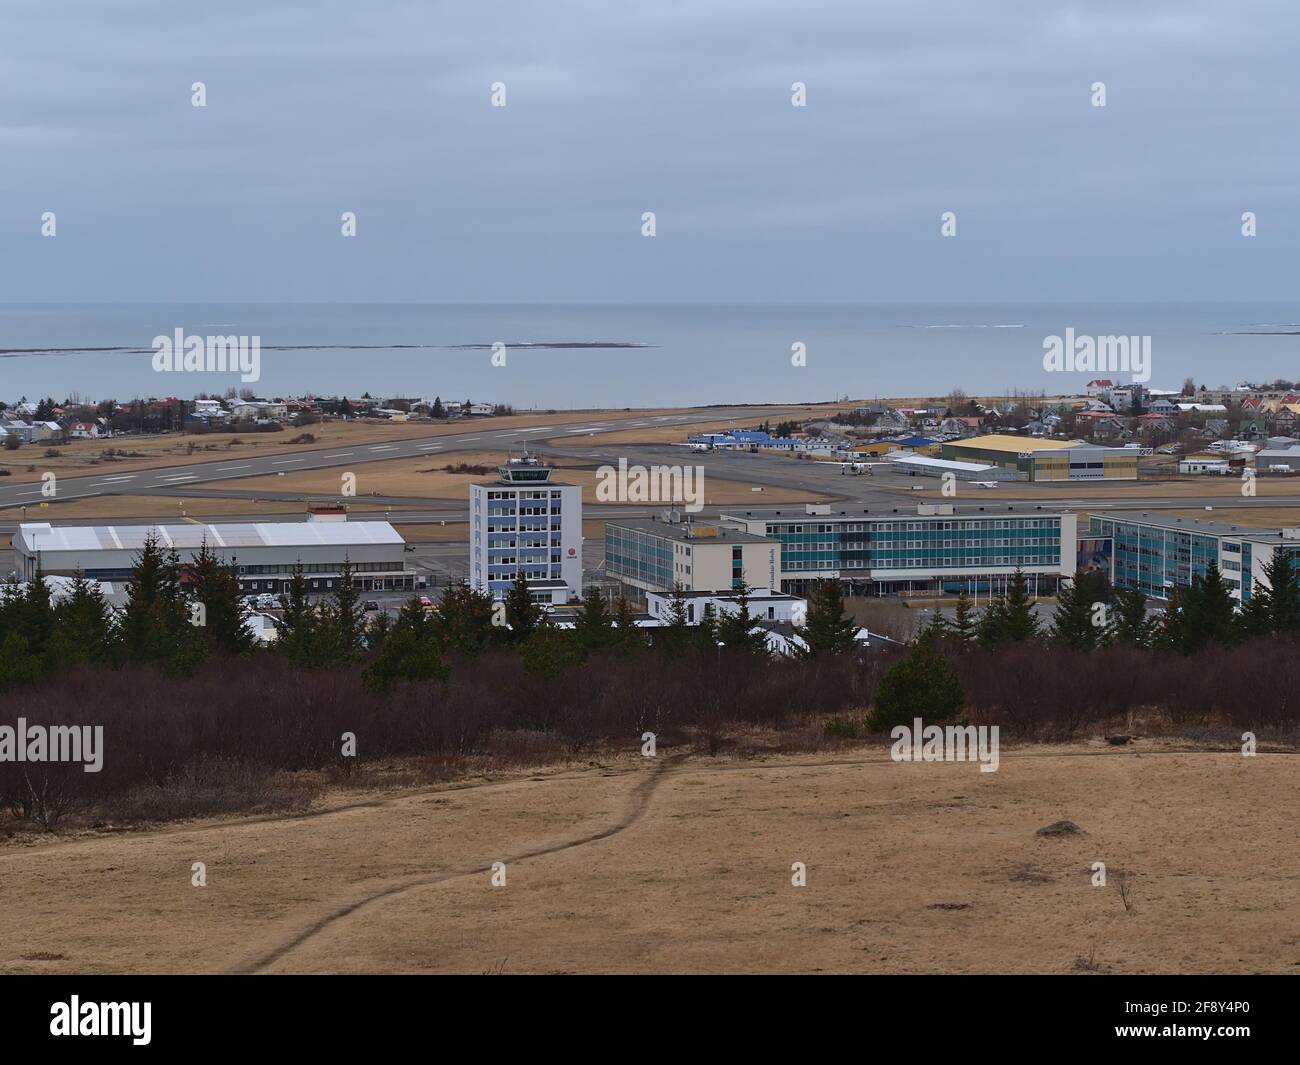 Aerial view of Reykjavik domestic airtport with runway and terminal building viewed from Perlan on Öskjuhlíð hill on cloudy winter day. Stock Photo